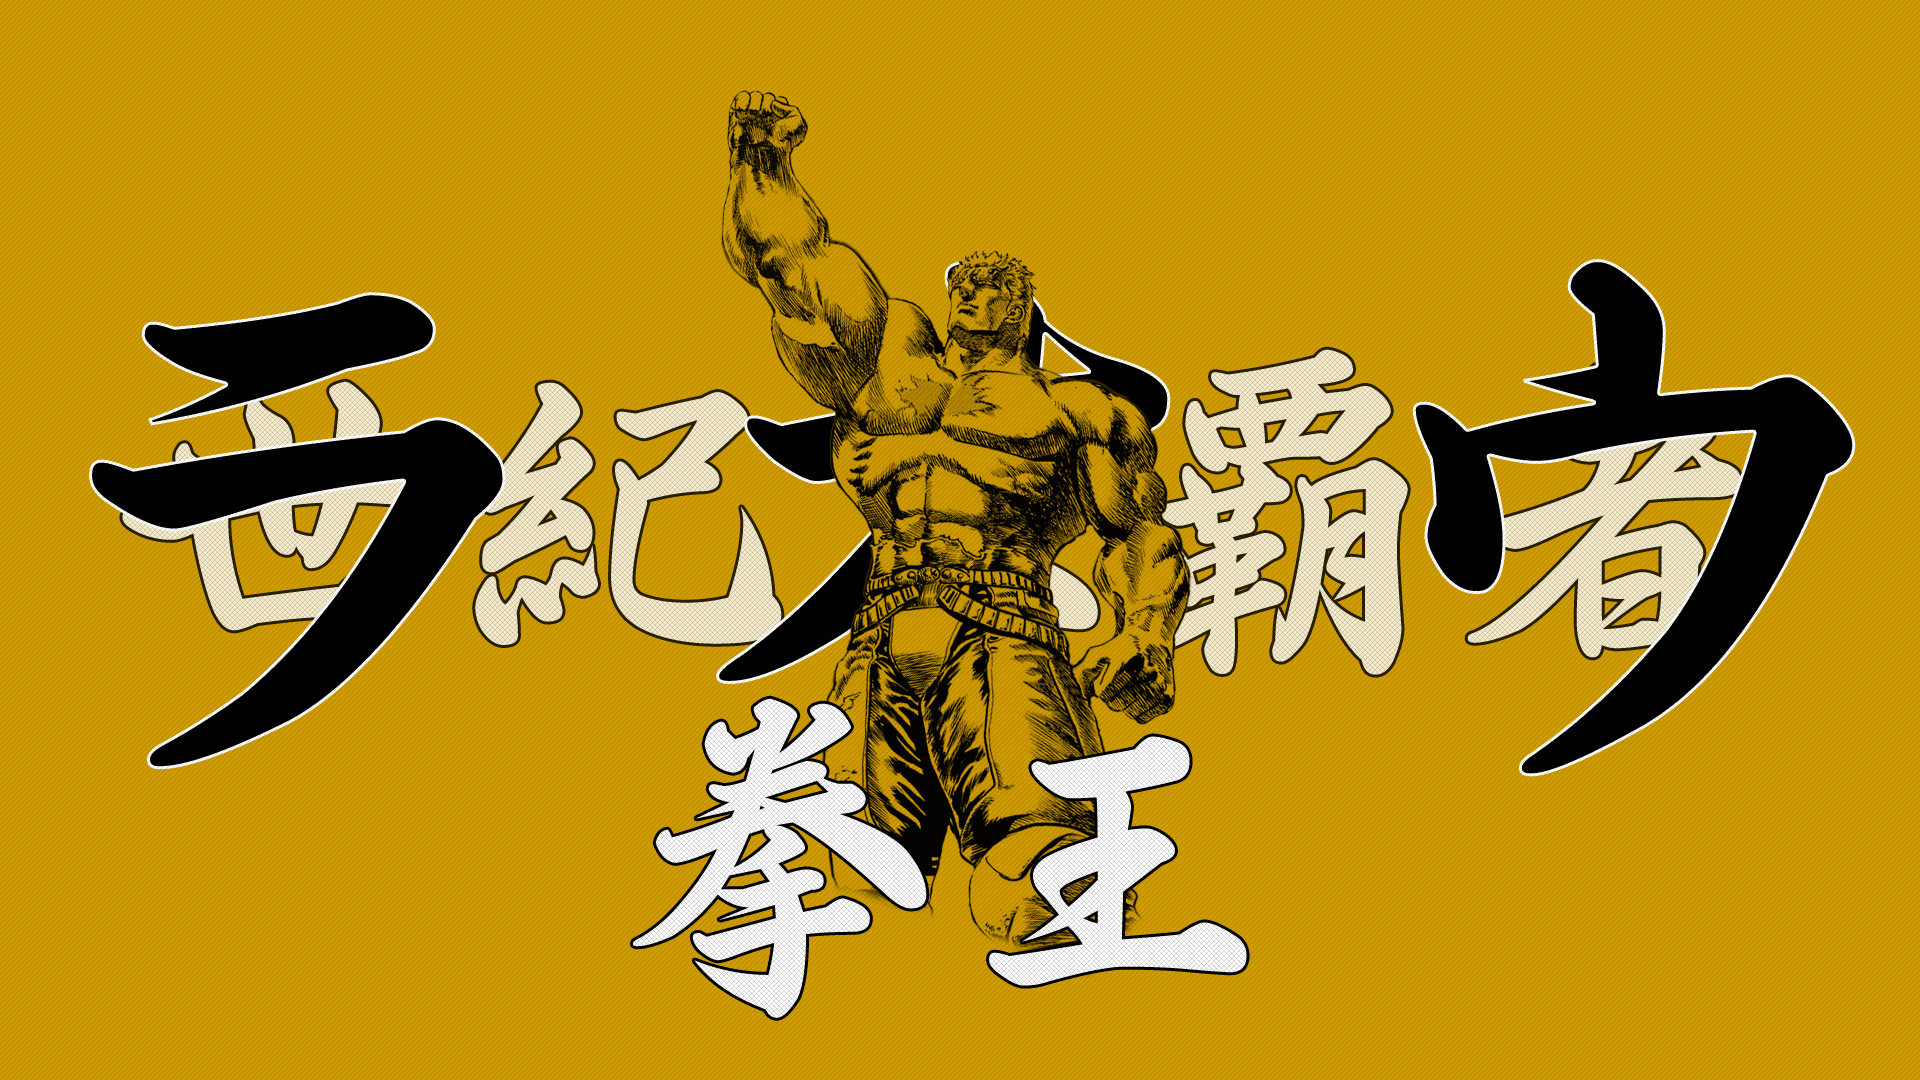 Fist Of The North Star Wallpaper - Fist Of The North Star Wallpaper Hd - HD Wallpaper 